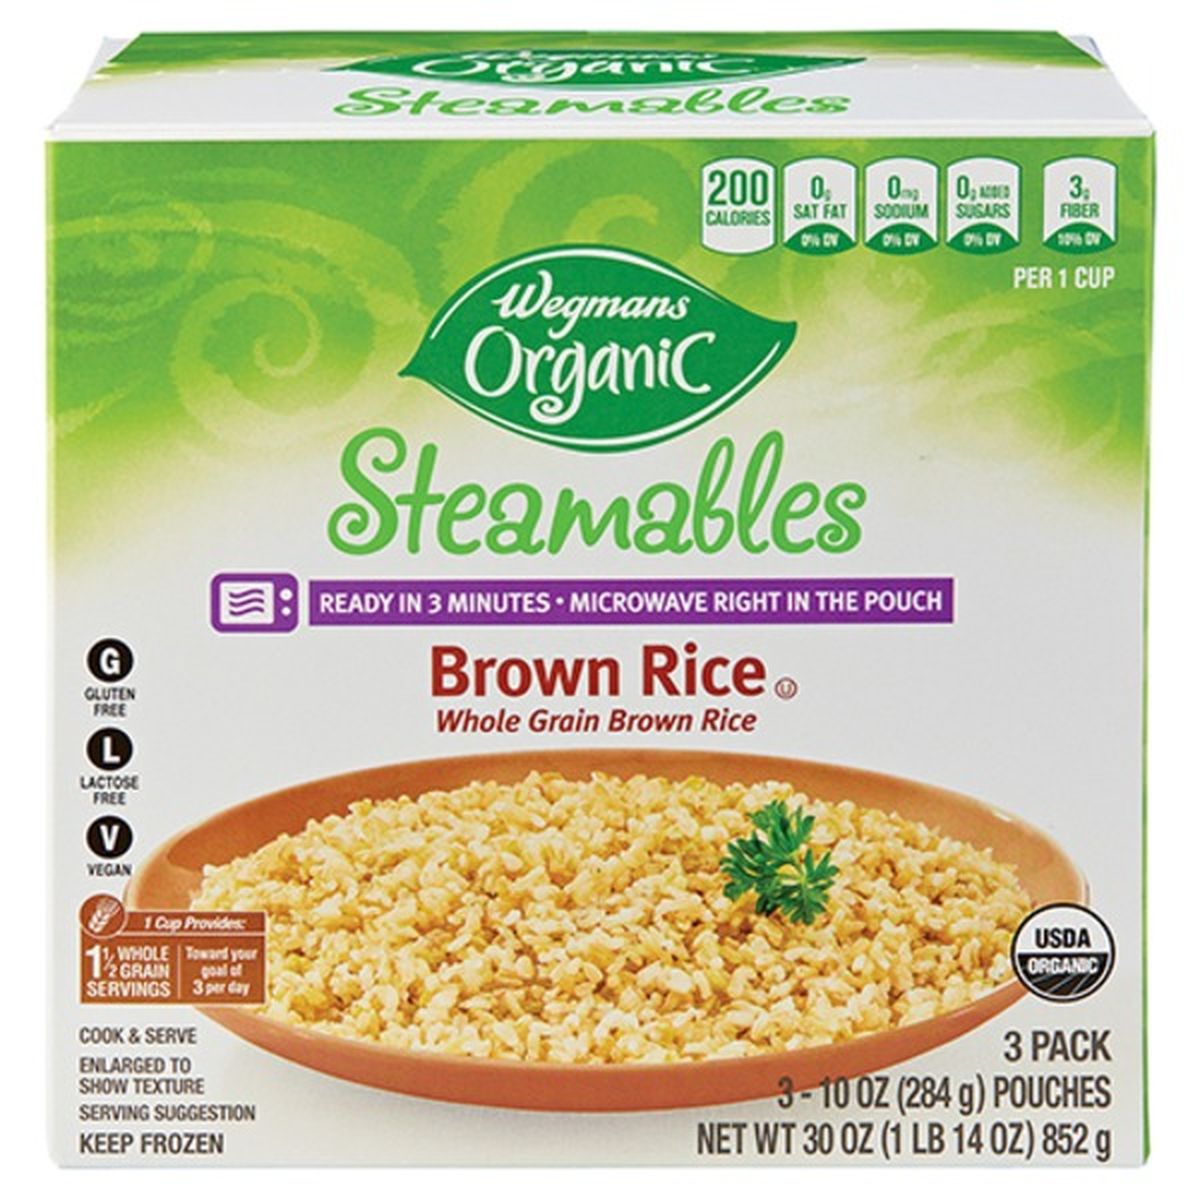 Calories in Wegmans Organic Steamables, Brown Rice